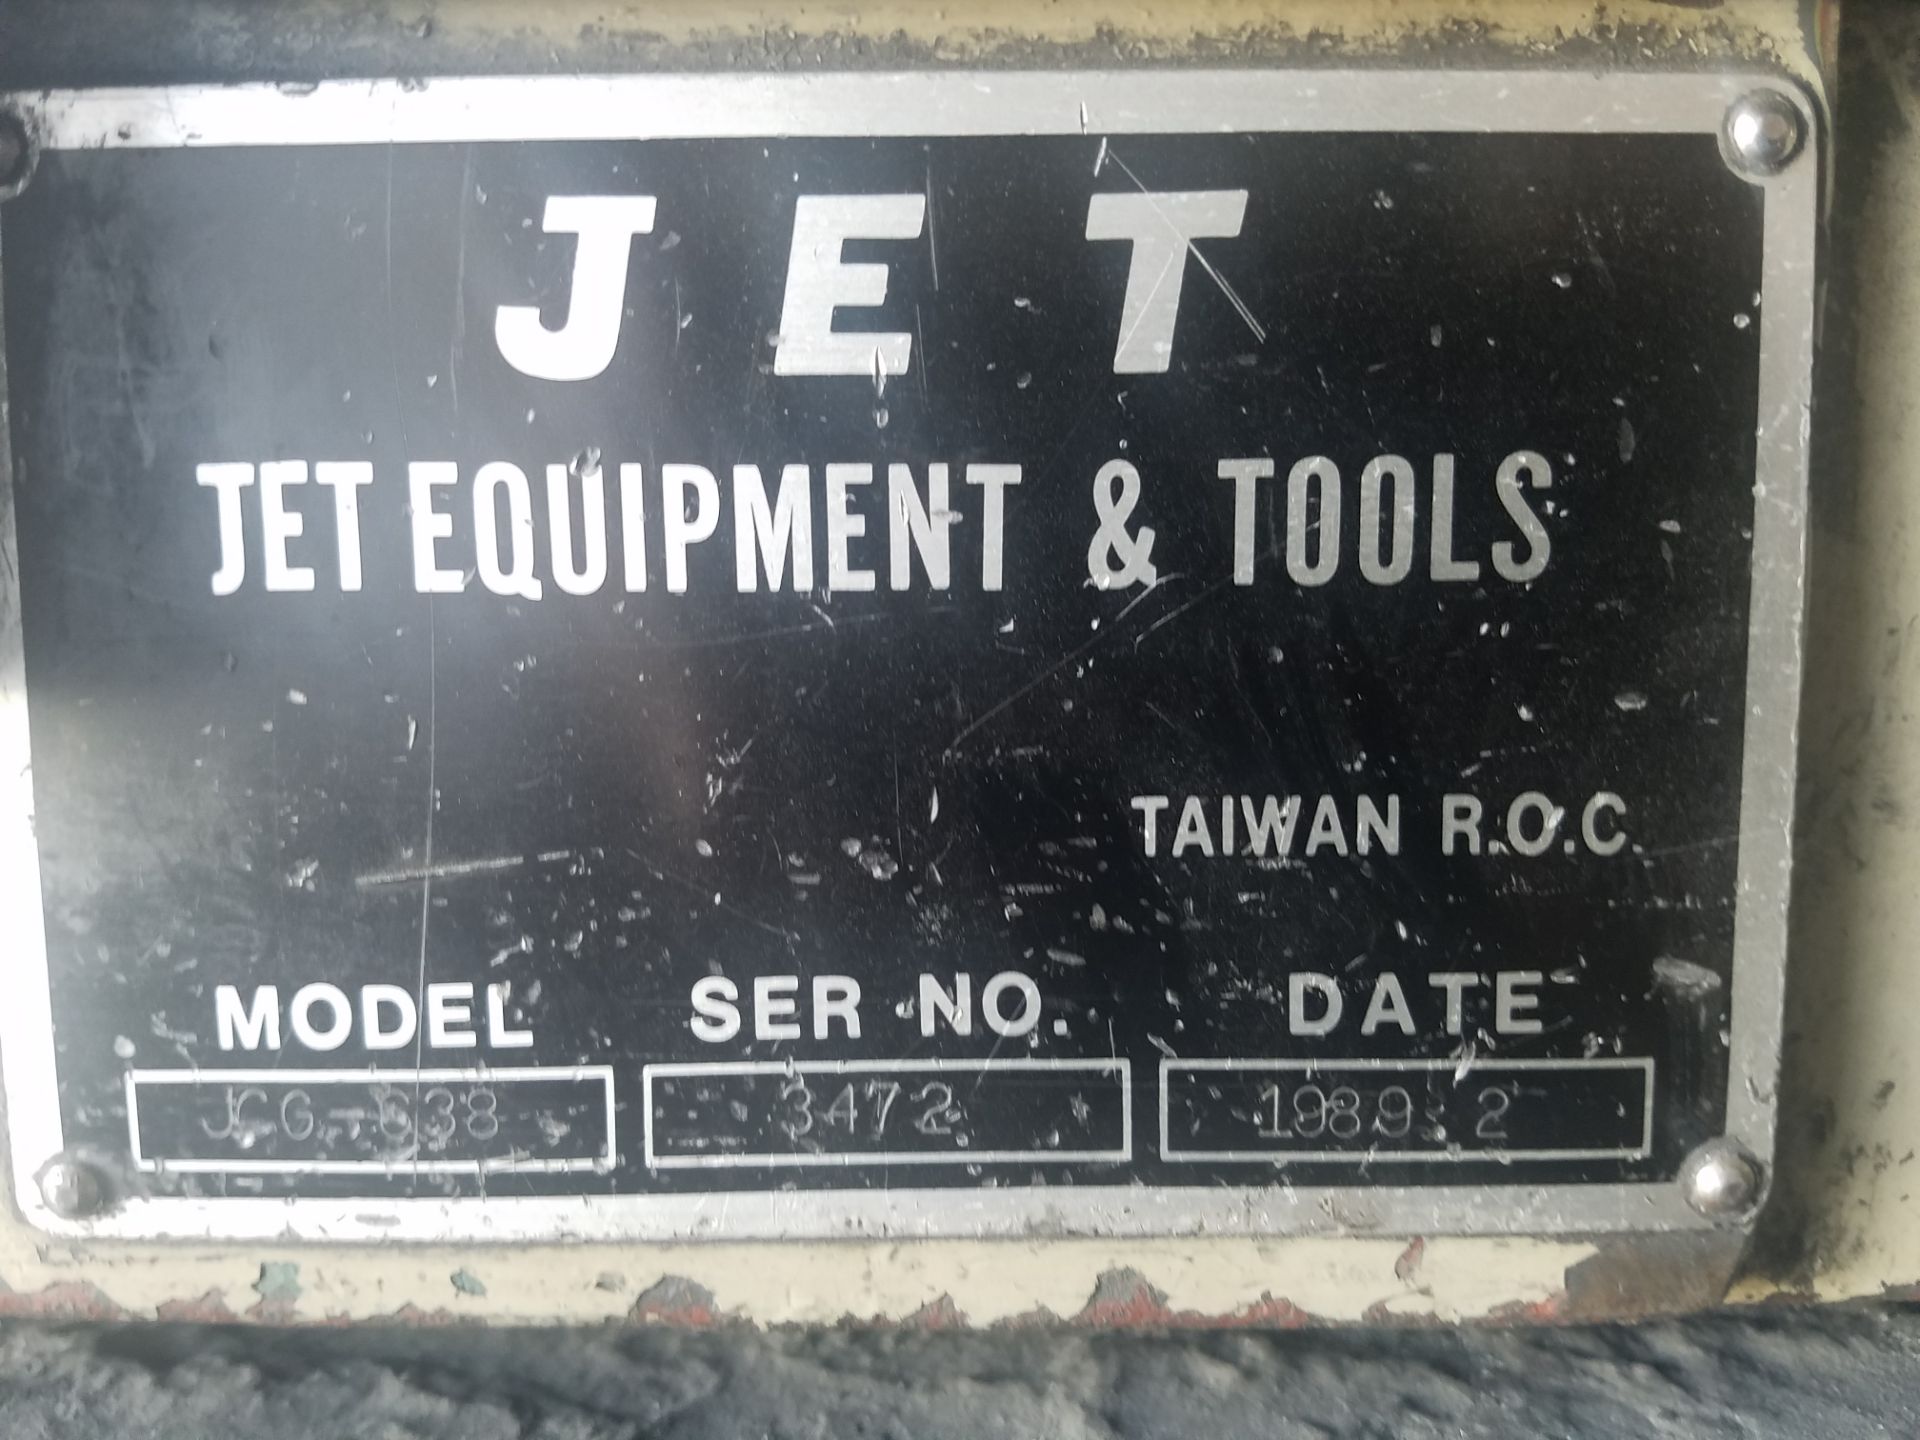 1989 Jet Mod, JCG-638 Cutter & Tool Grinder 37"x5 1/2" Bed, 2 Spindle Head - Image 7 of 7